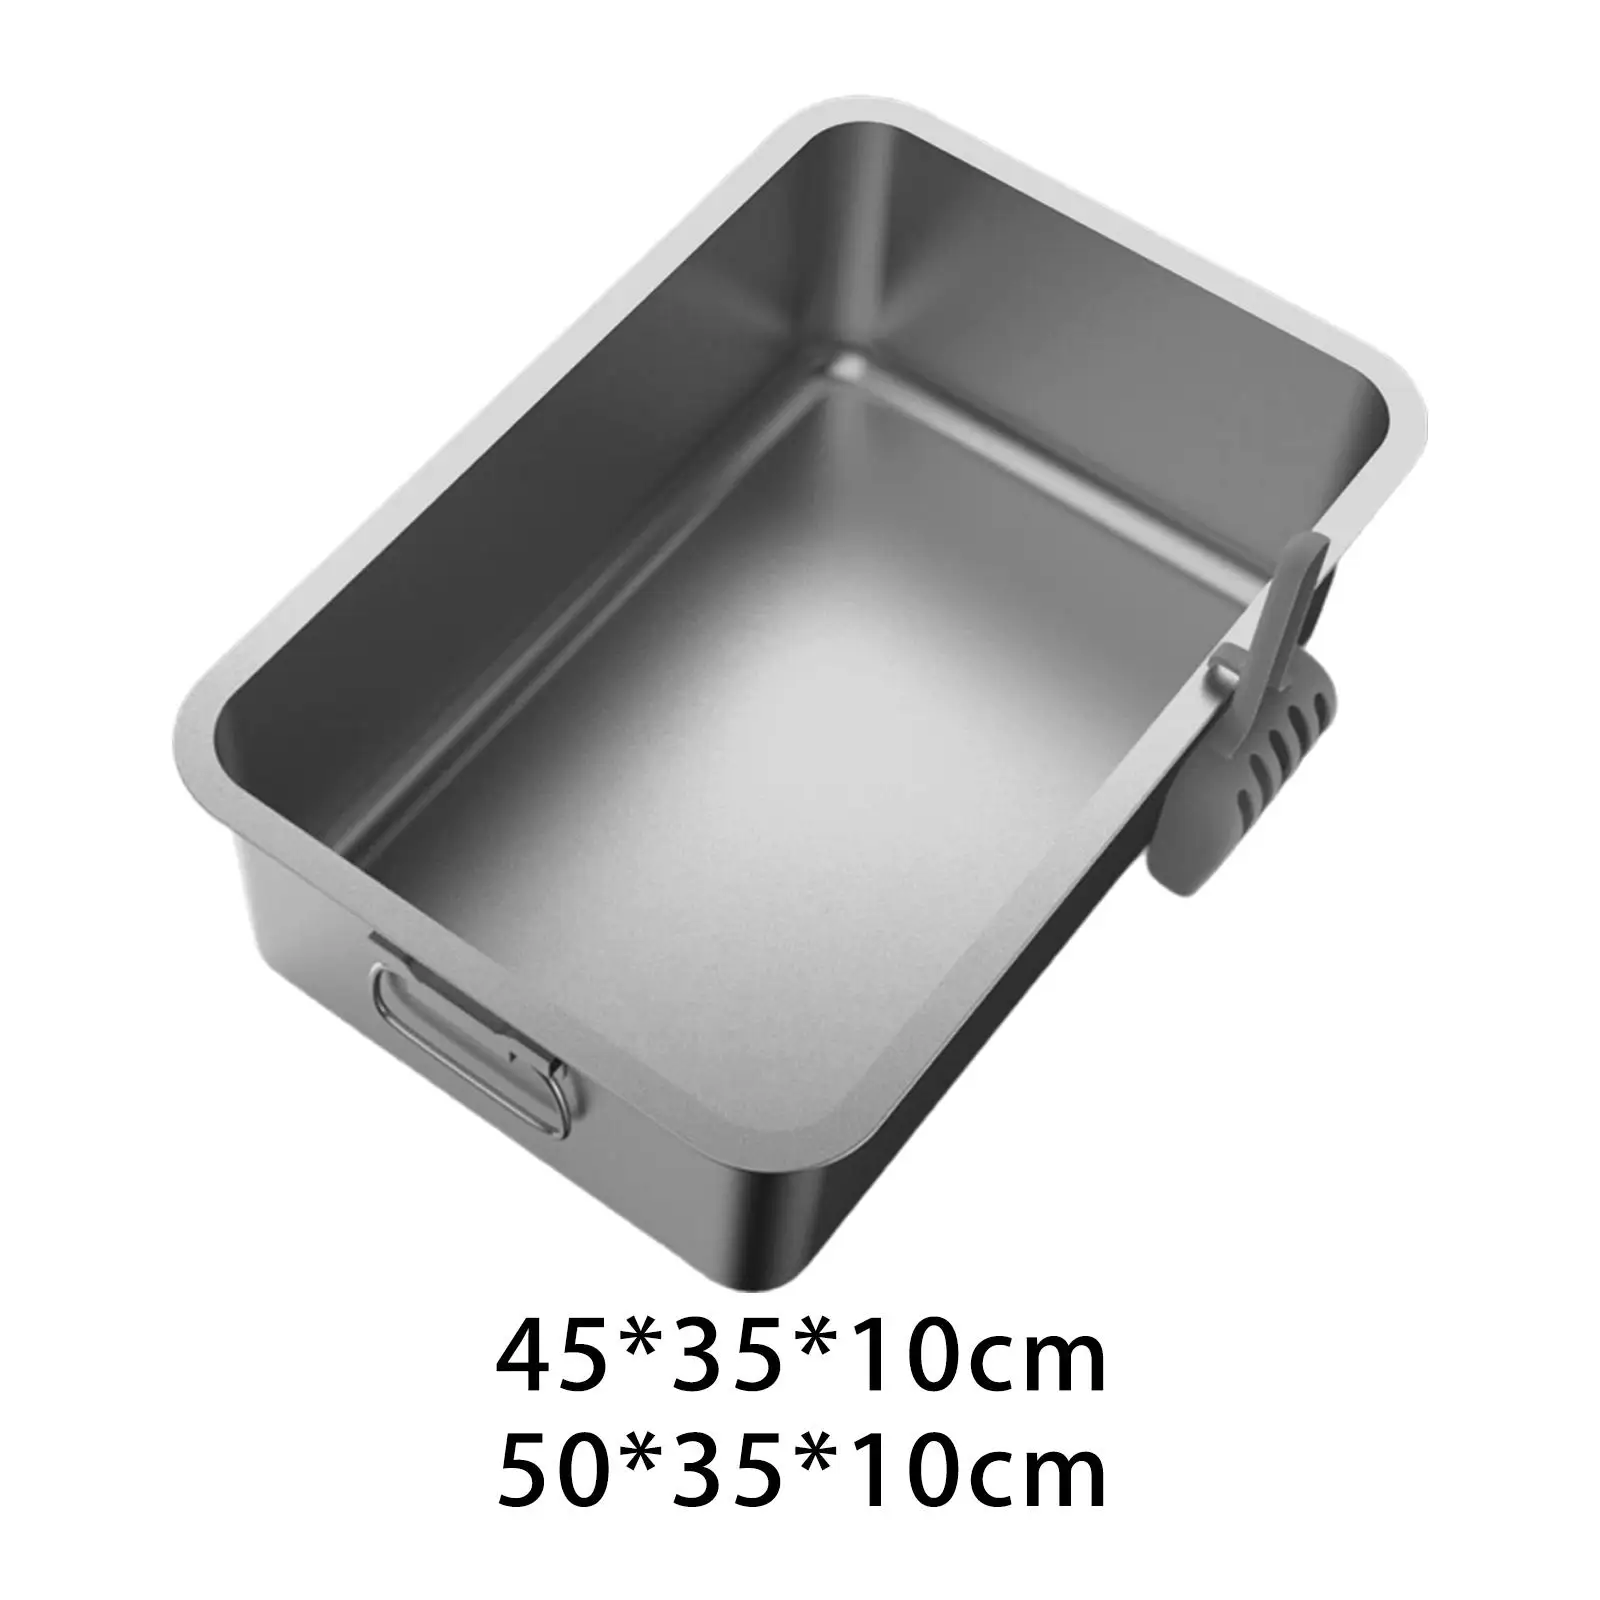 Kitten Cat Litter Box Stainless Steel Rounded Edges Anti Rust with Side Carrying Handle